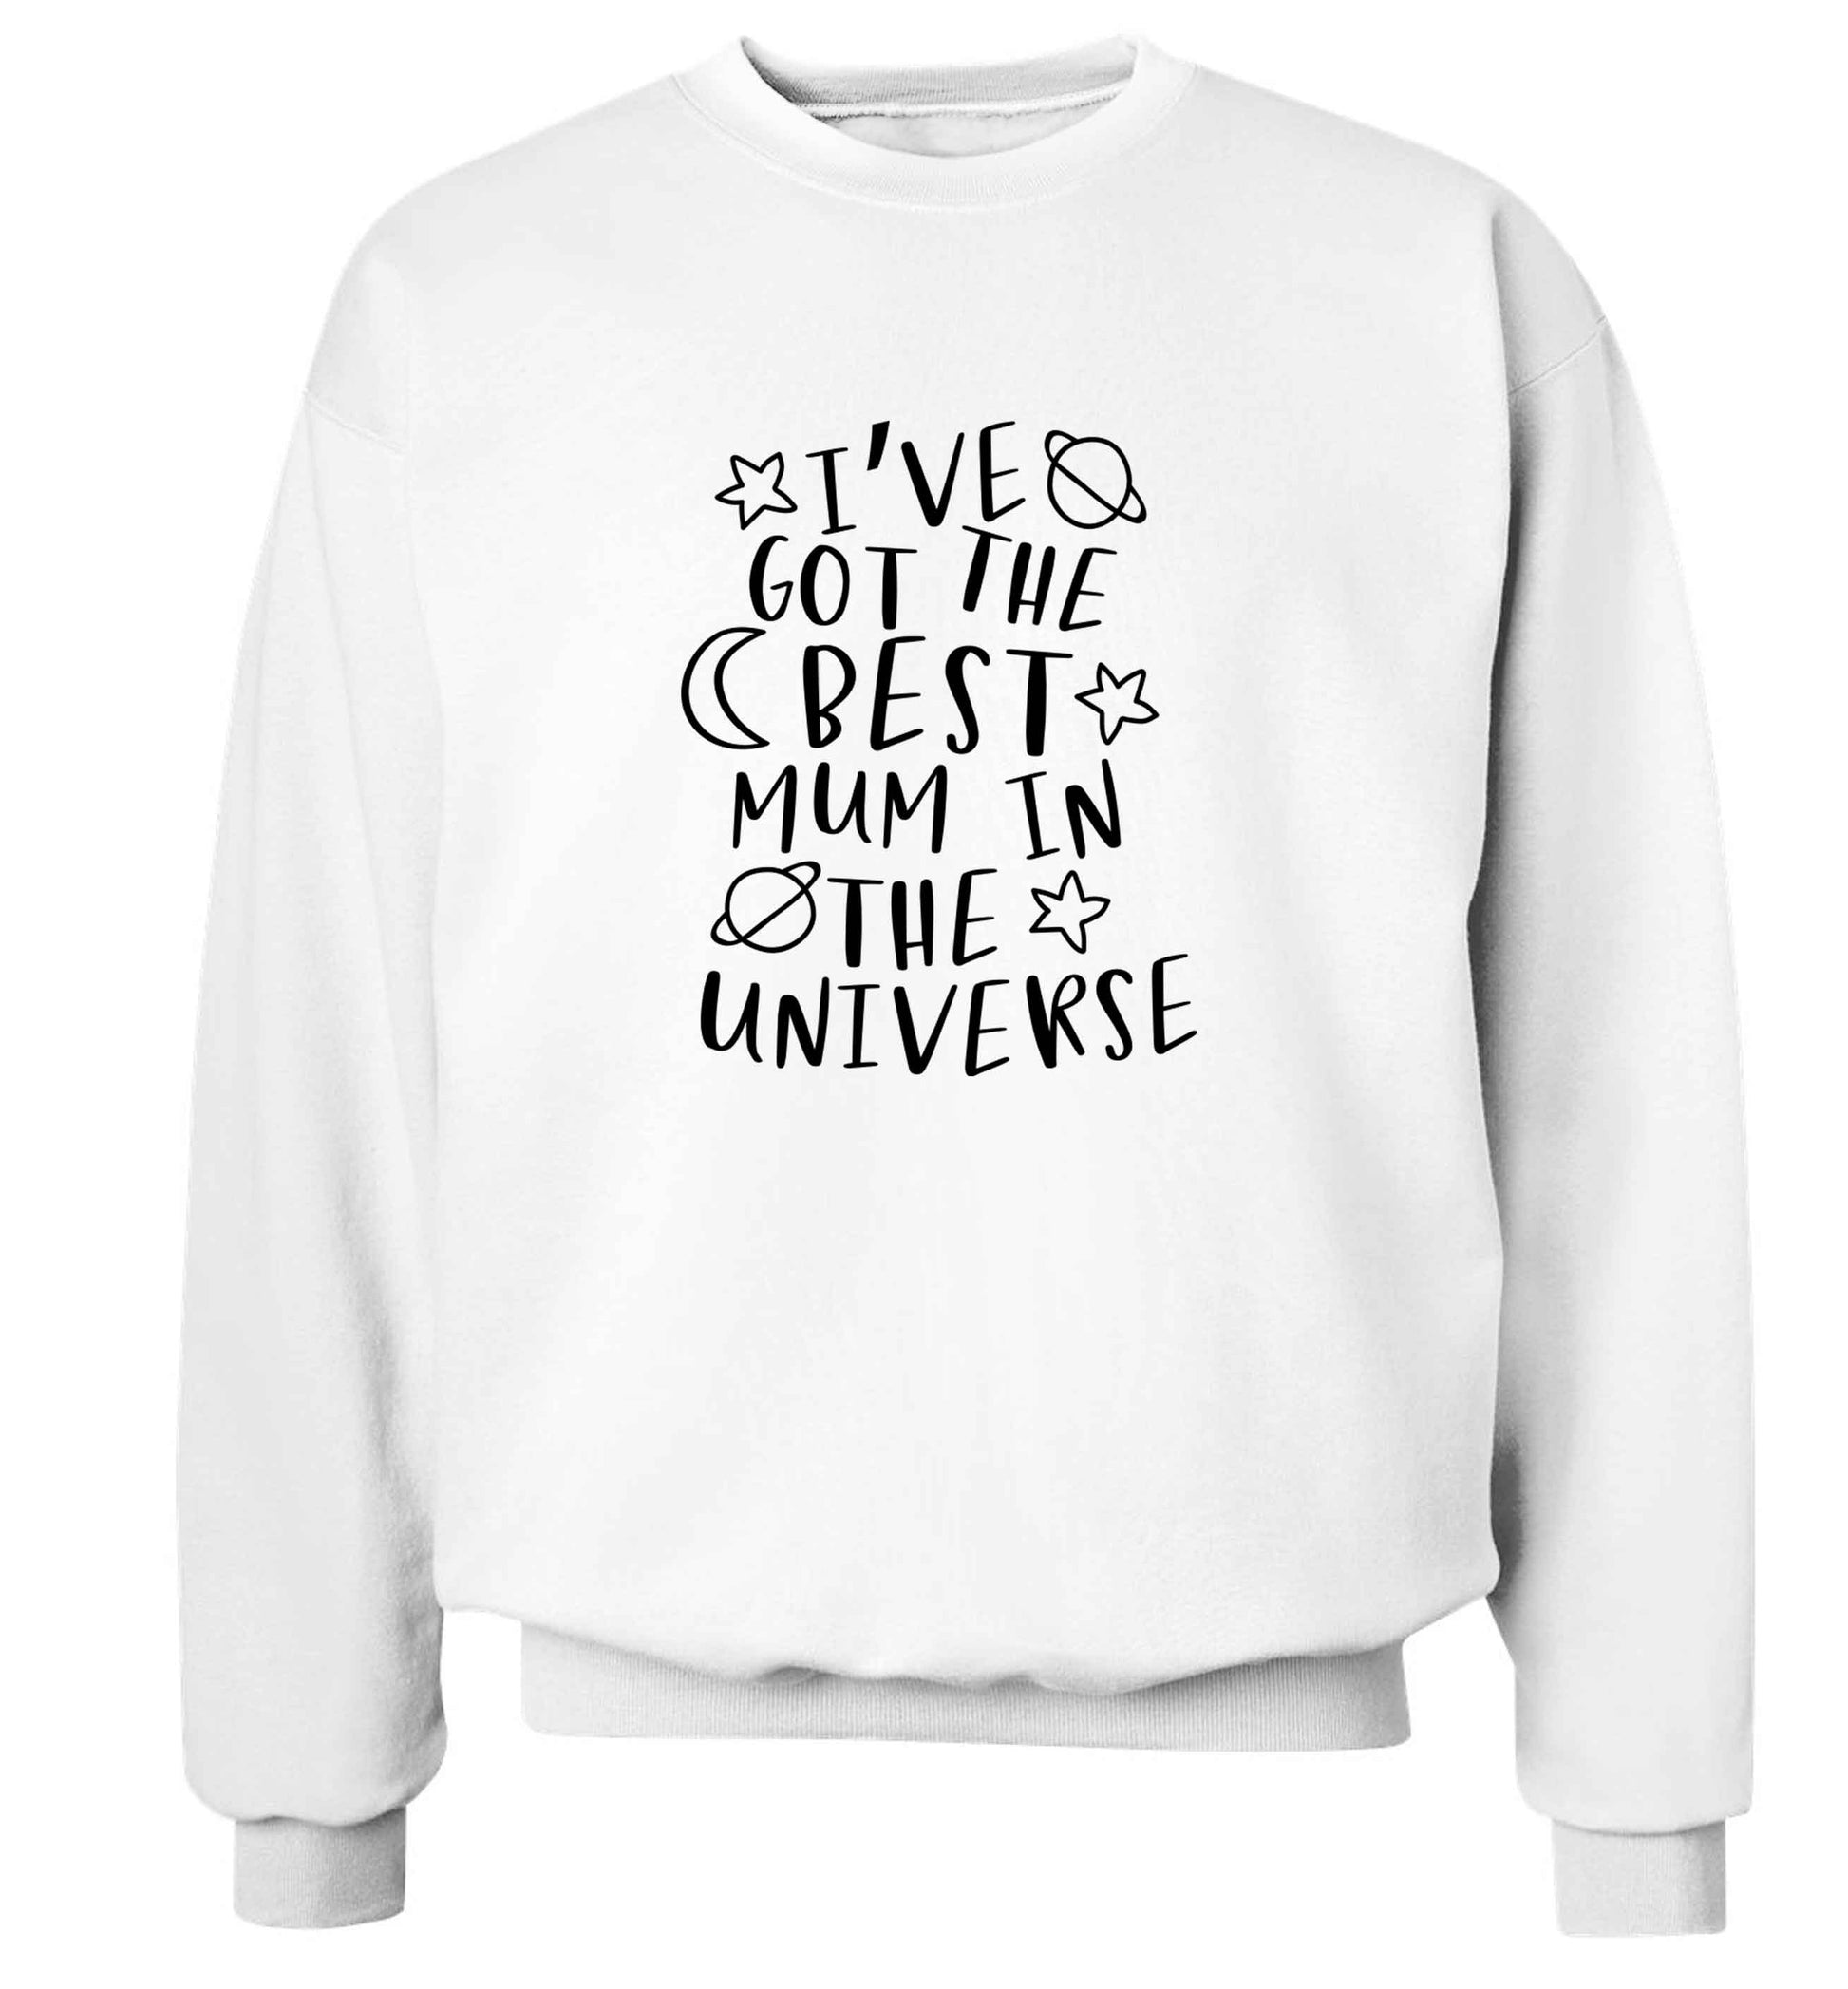 I've got the best mum in the universe adult's unisex white sweater 2XL